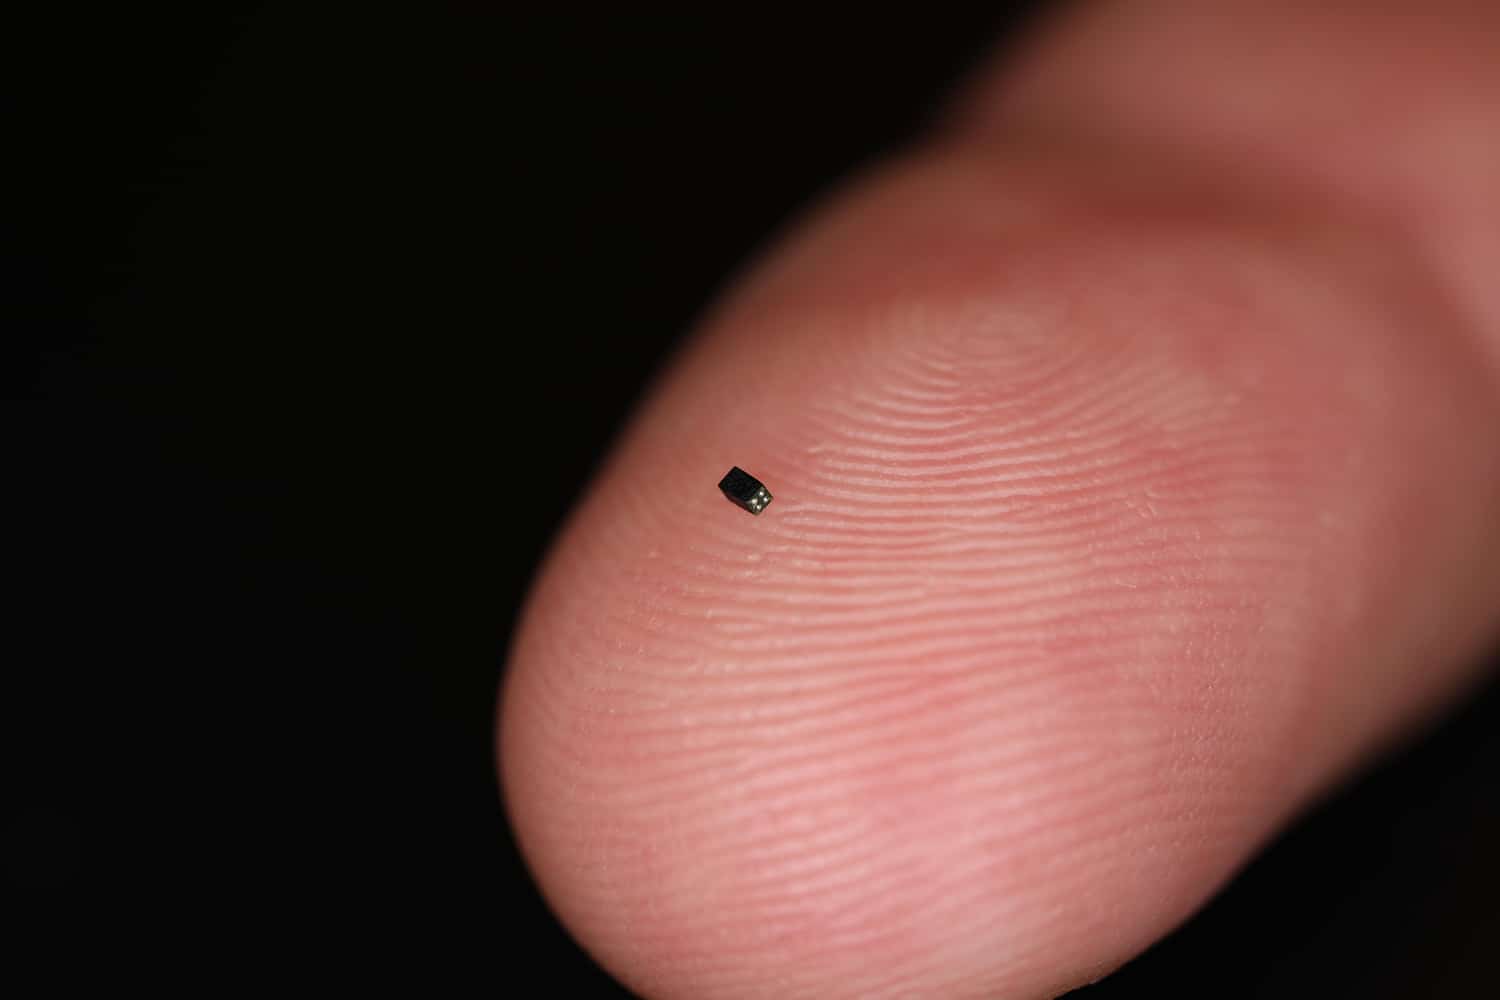 What is the smallest spy camera in the world